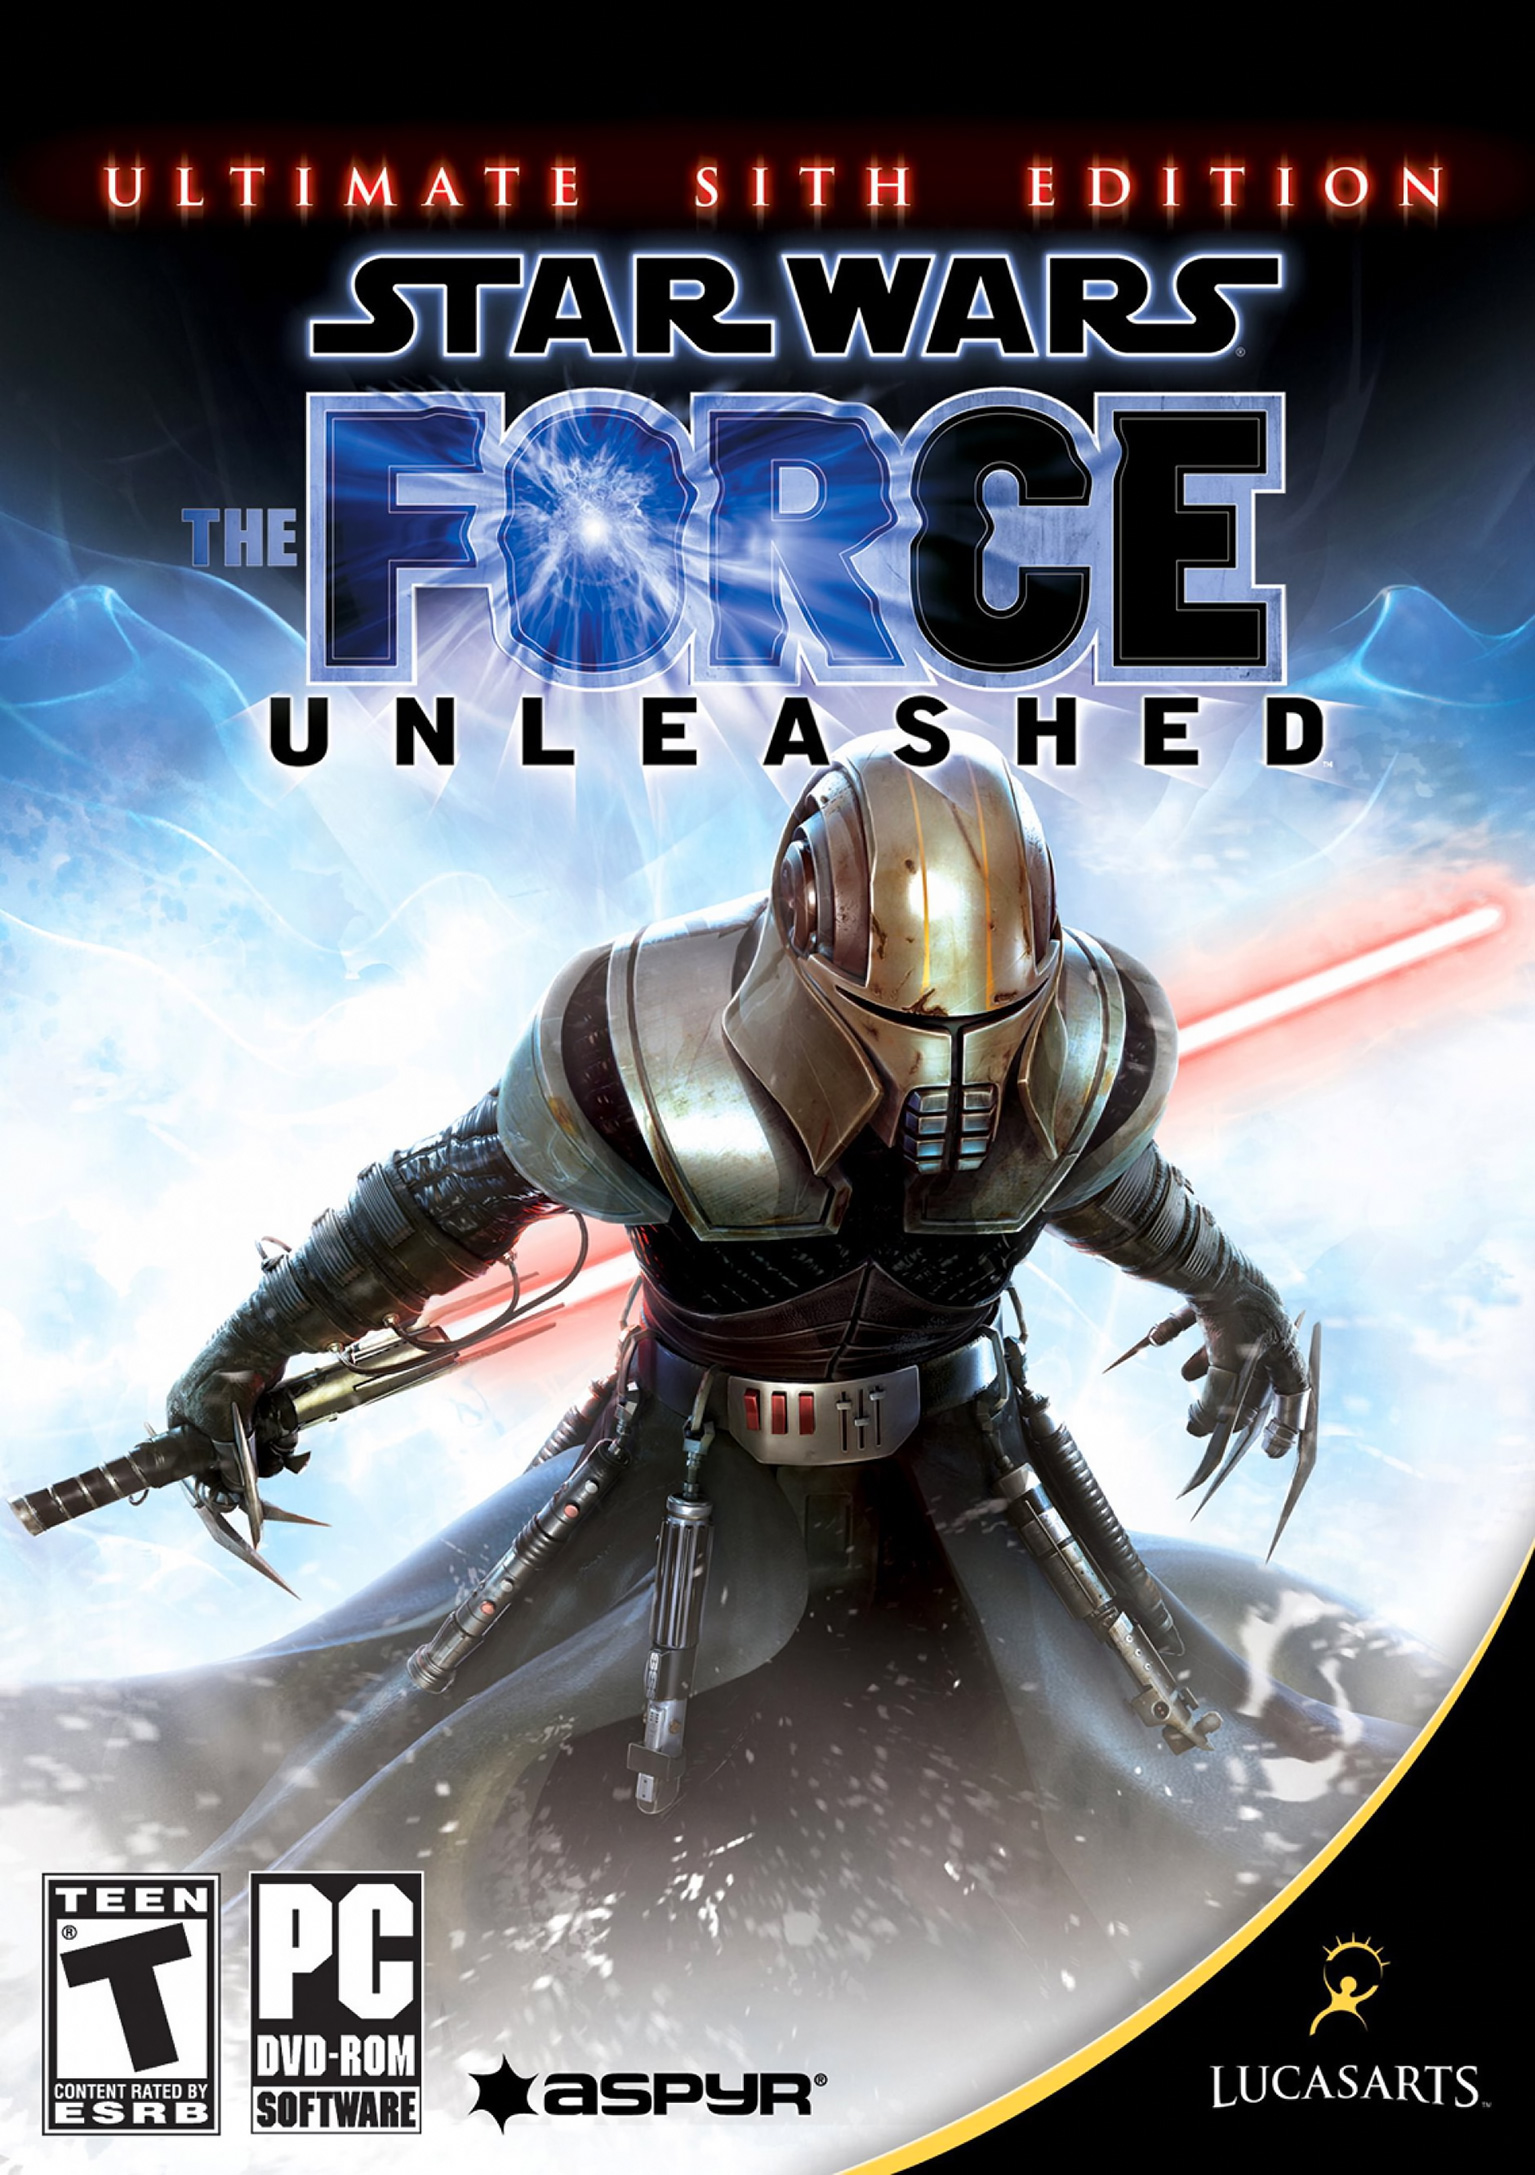 Star Wars: The Force Unleashed - Ultimate Sith Edition - predn DVD obal